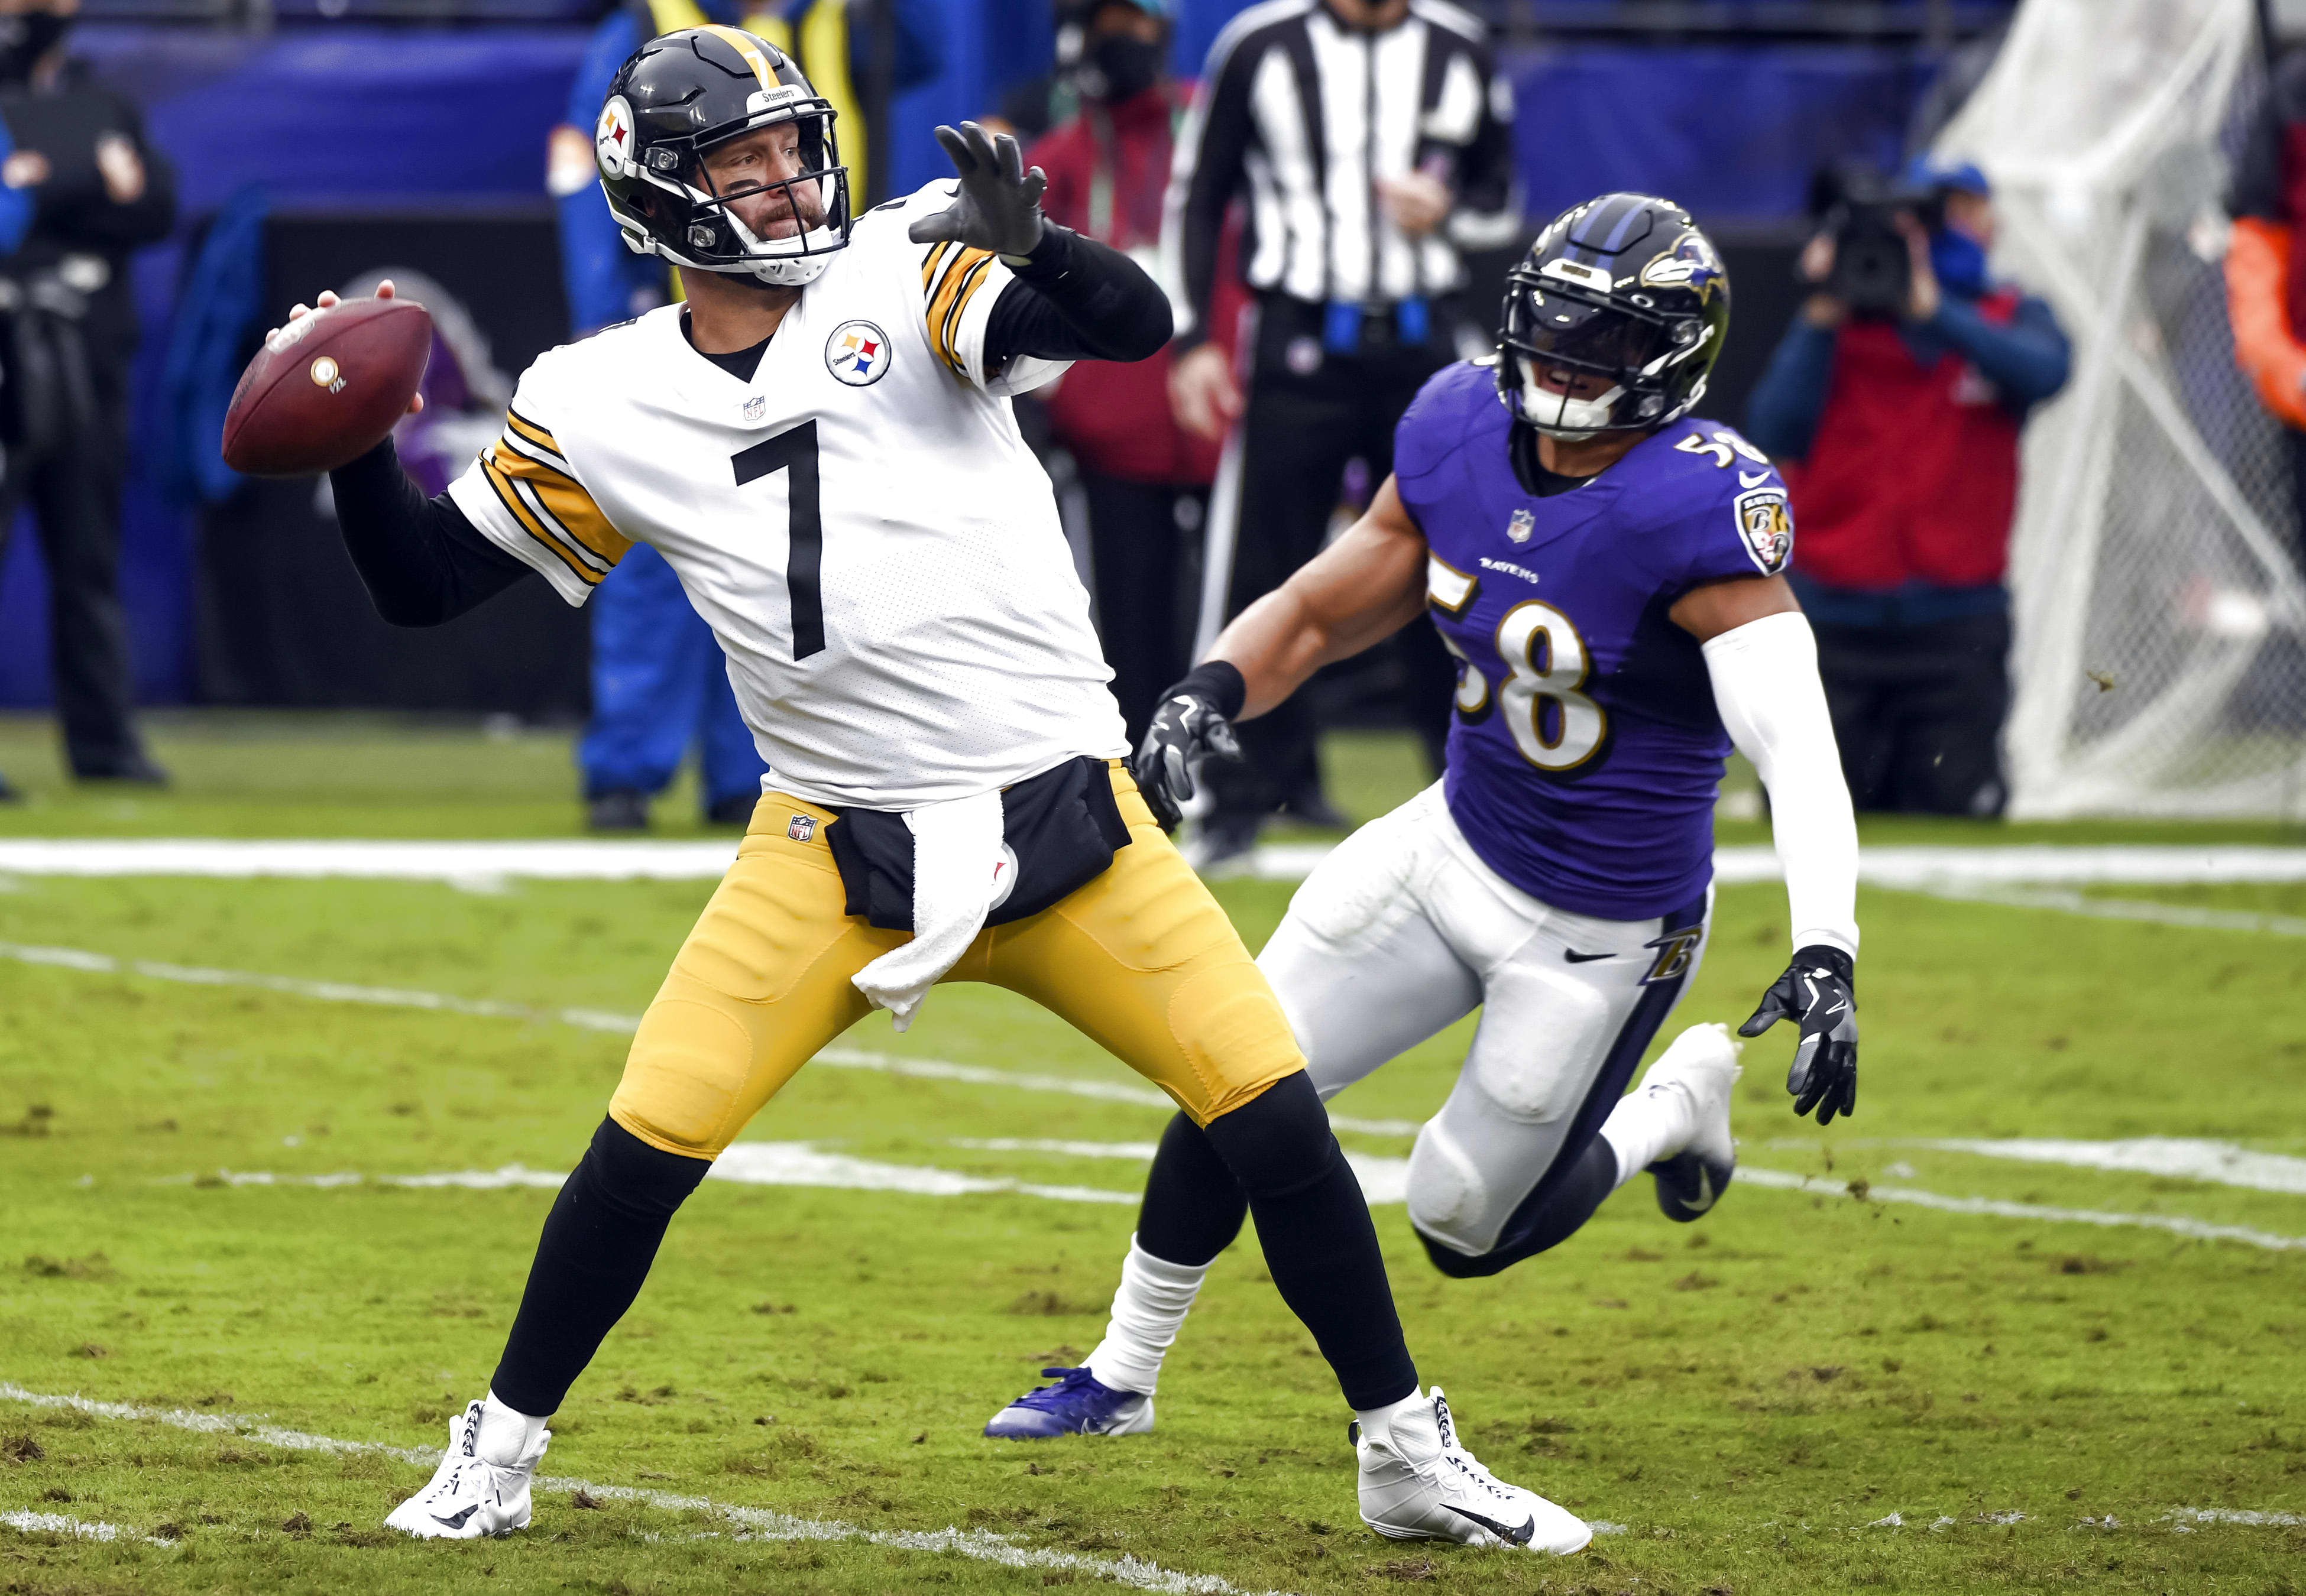 NFL's Steelers-Ravens game postponed a third time due to Covid-19 - CNBC